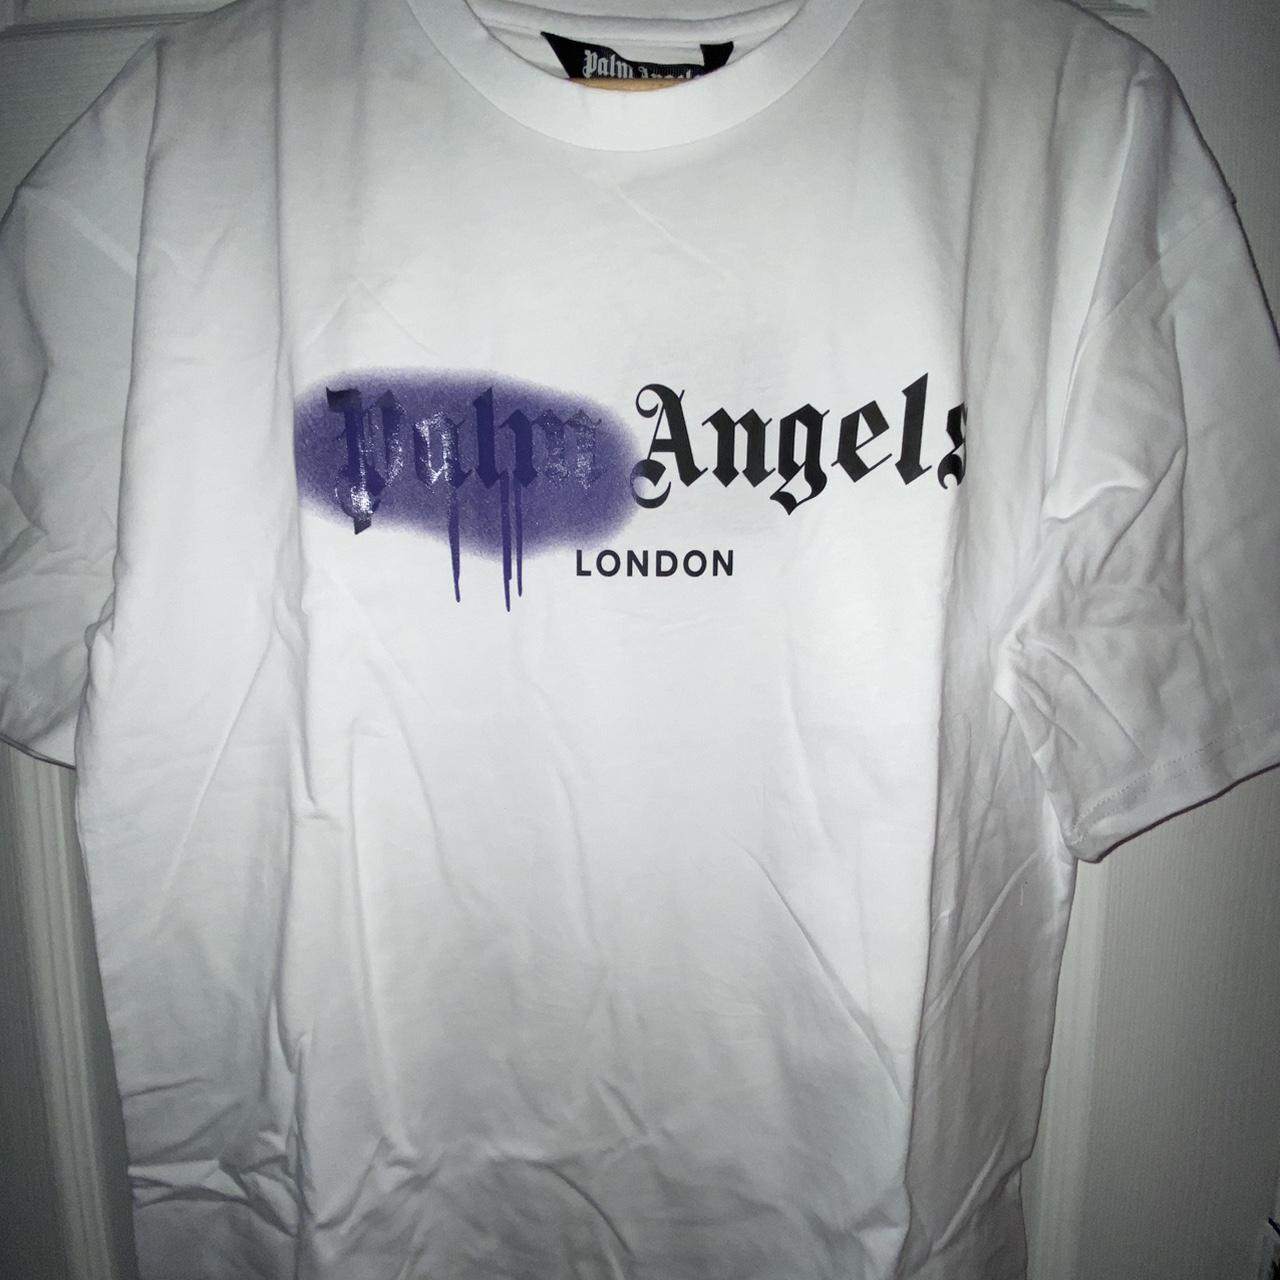 Palm Angels t shirt, in Willesden, London